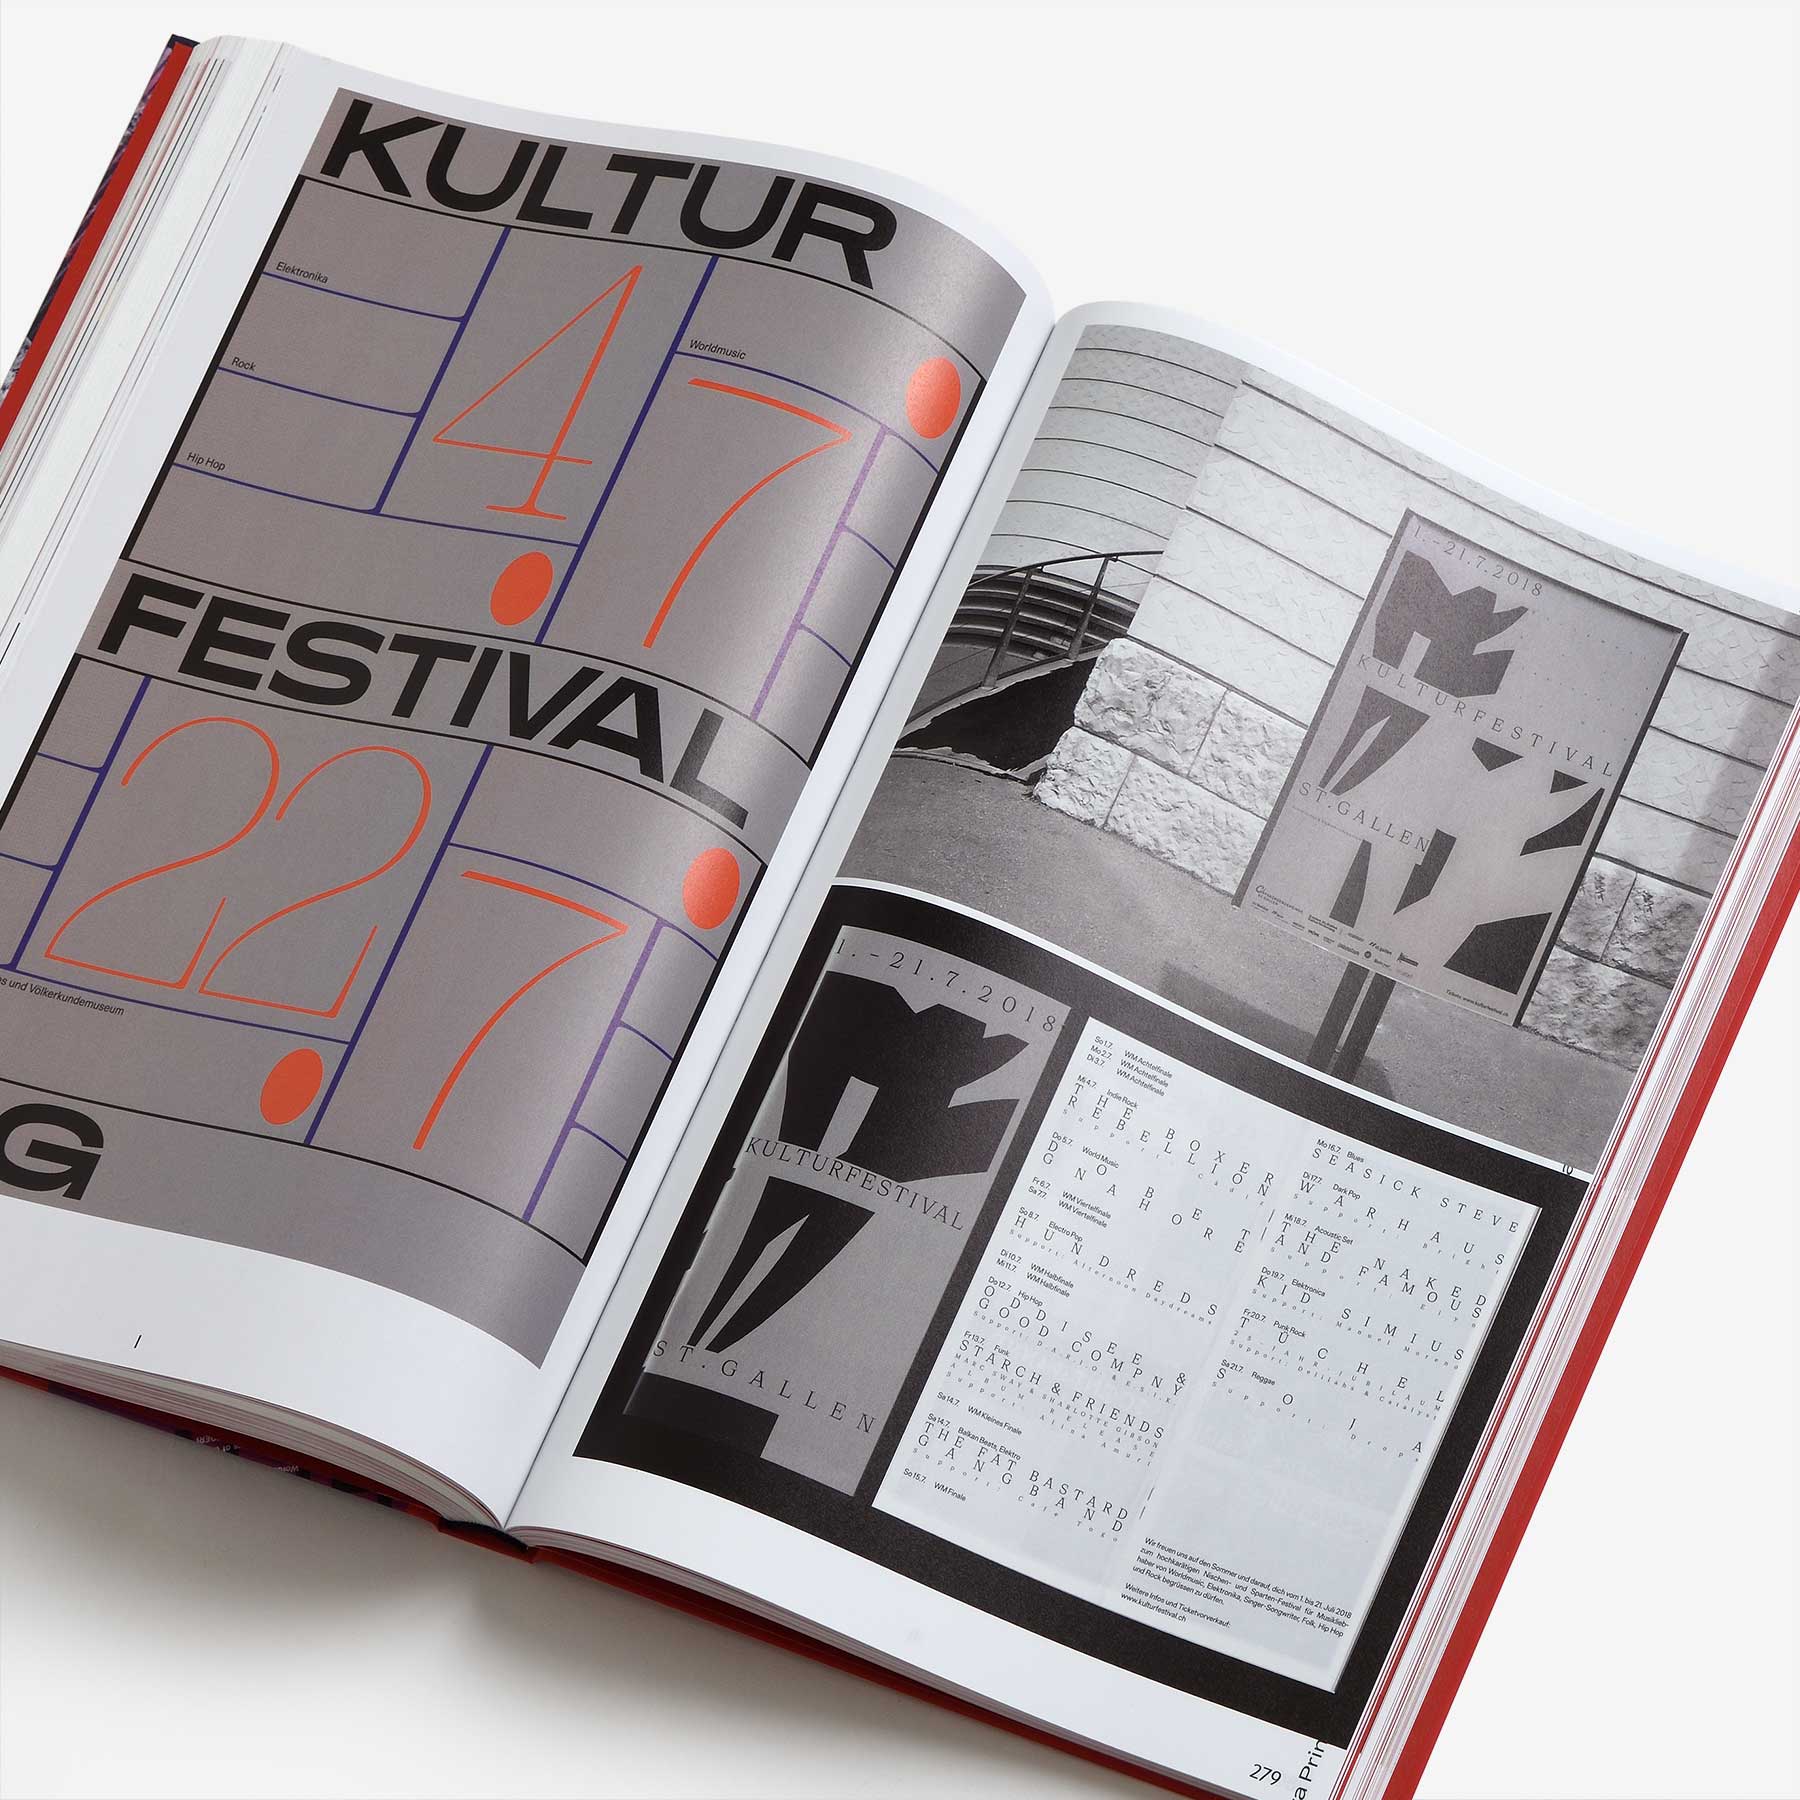 notamuse: A New Perspective on Women Graphic Designers in Europe